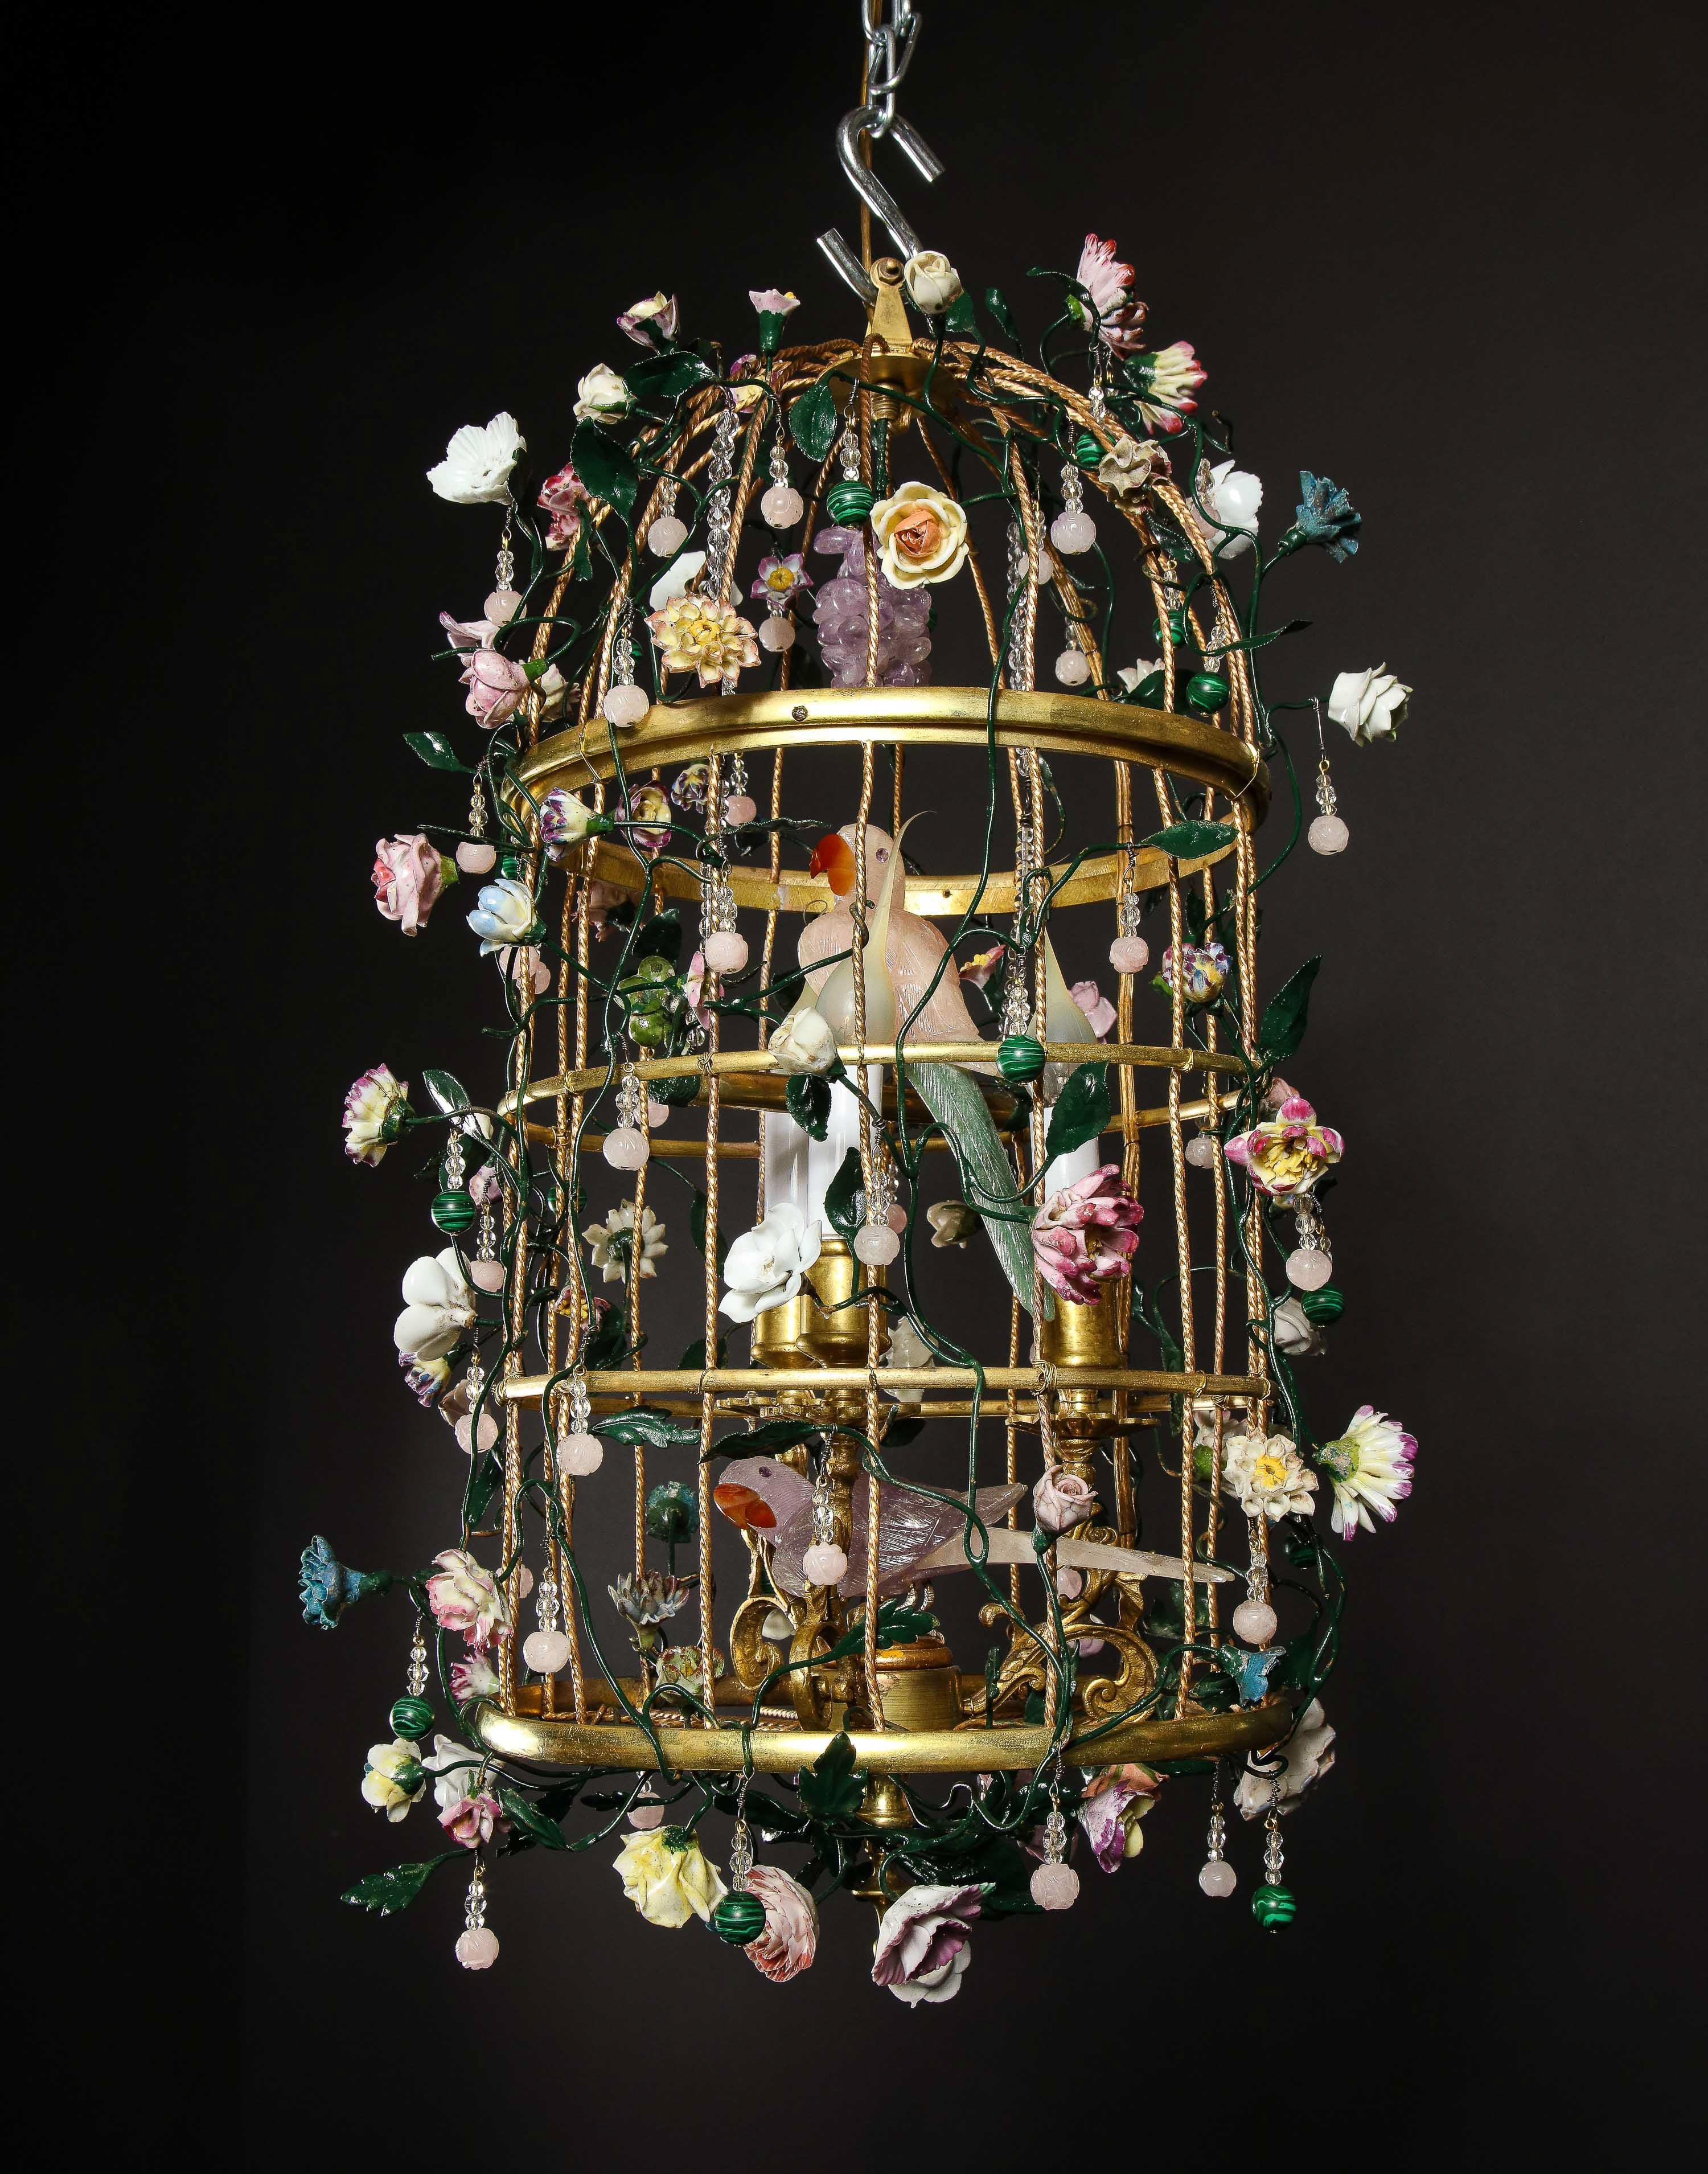 A Magnificent French Louis XVI style Gilt Bronze Birdcage Form Multi Light Chandelier with Two Hand-Carved PInk and Amethyst Rock Crystal Birds Perched on the Inside.  The exterior is highly embellished with multi-colored porcelain enameled flowers